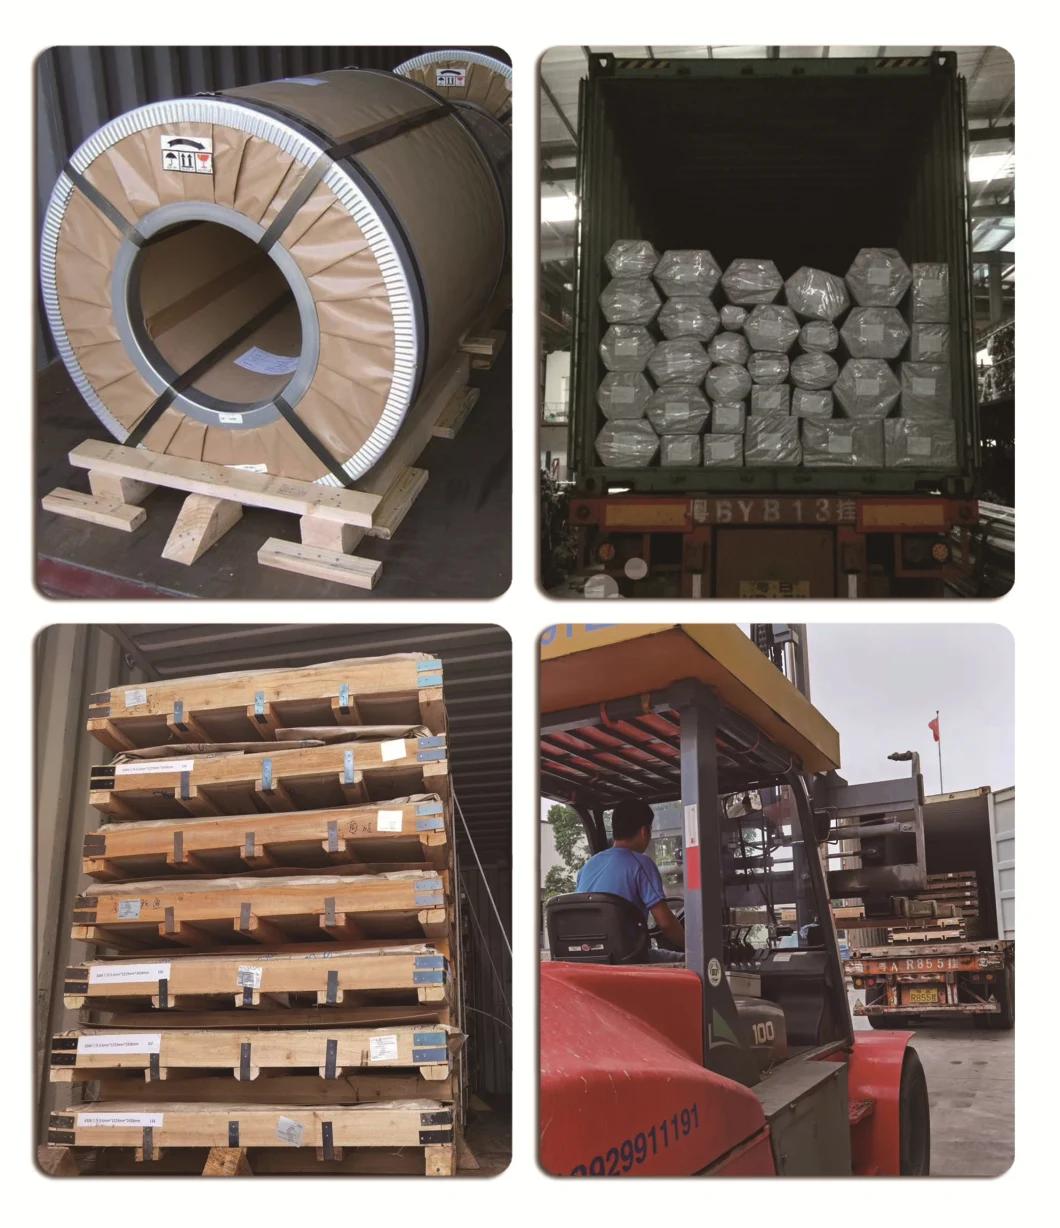 Saemless Pipe, Austenitic Stainless Steel Seamless Steel Pipe, Welded Steel Pipe, 300 Series 201 ASTM Aisifor Boilers and Heat Exchangers, Boiler Tubes